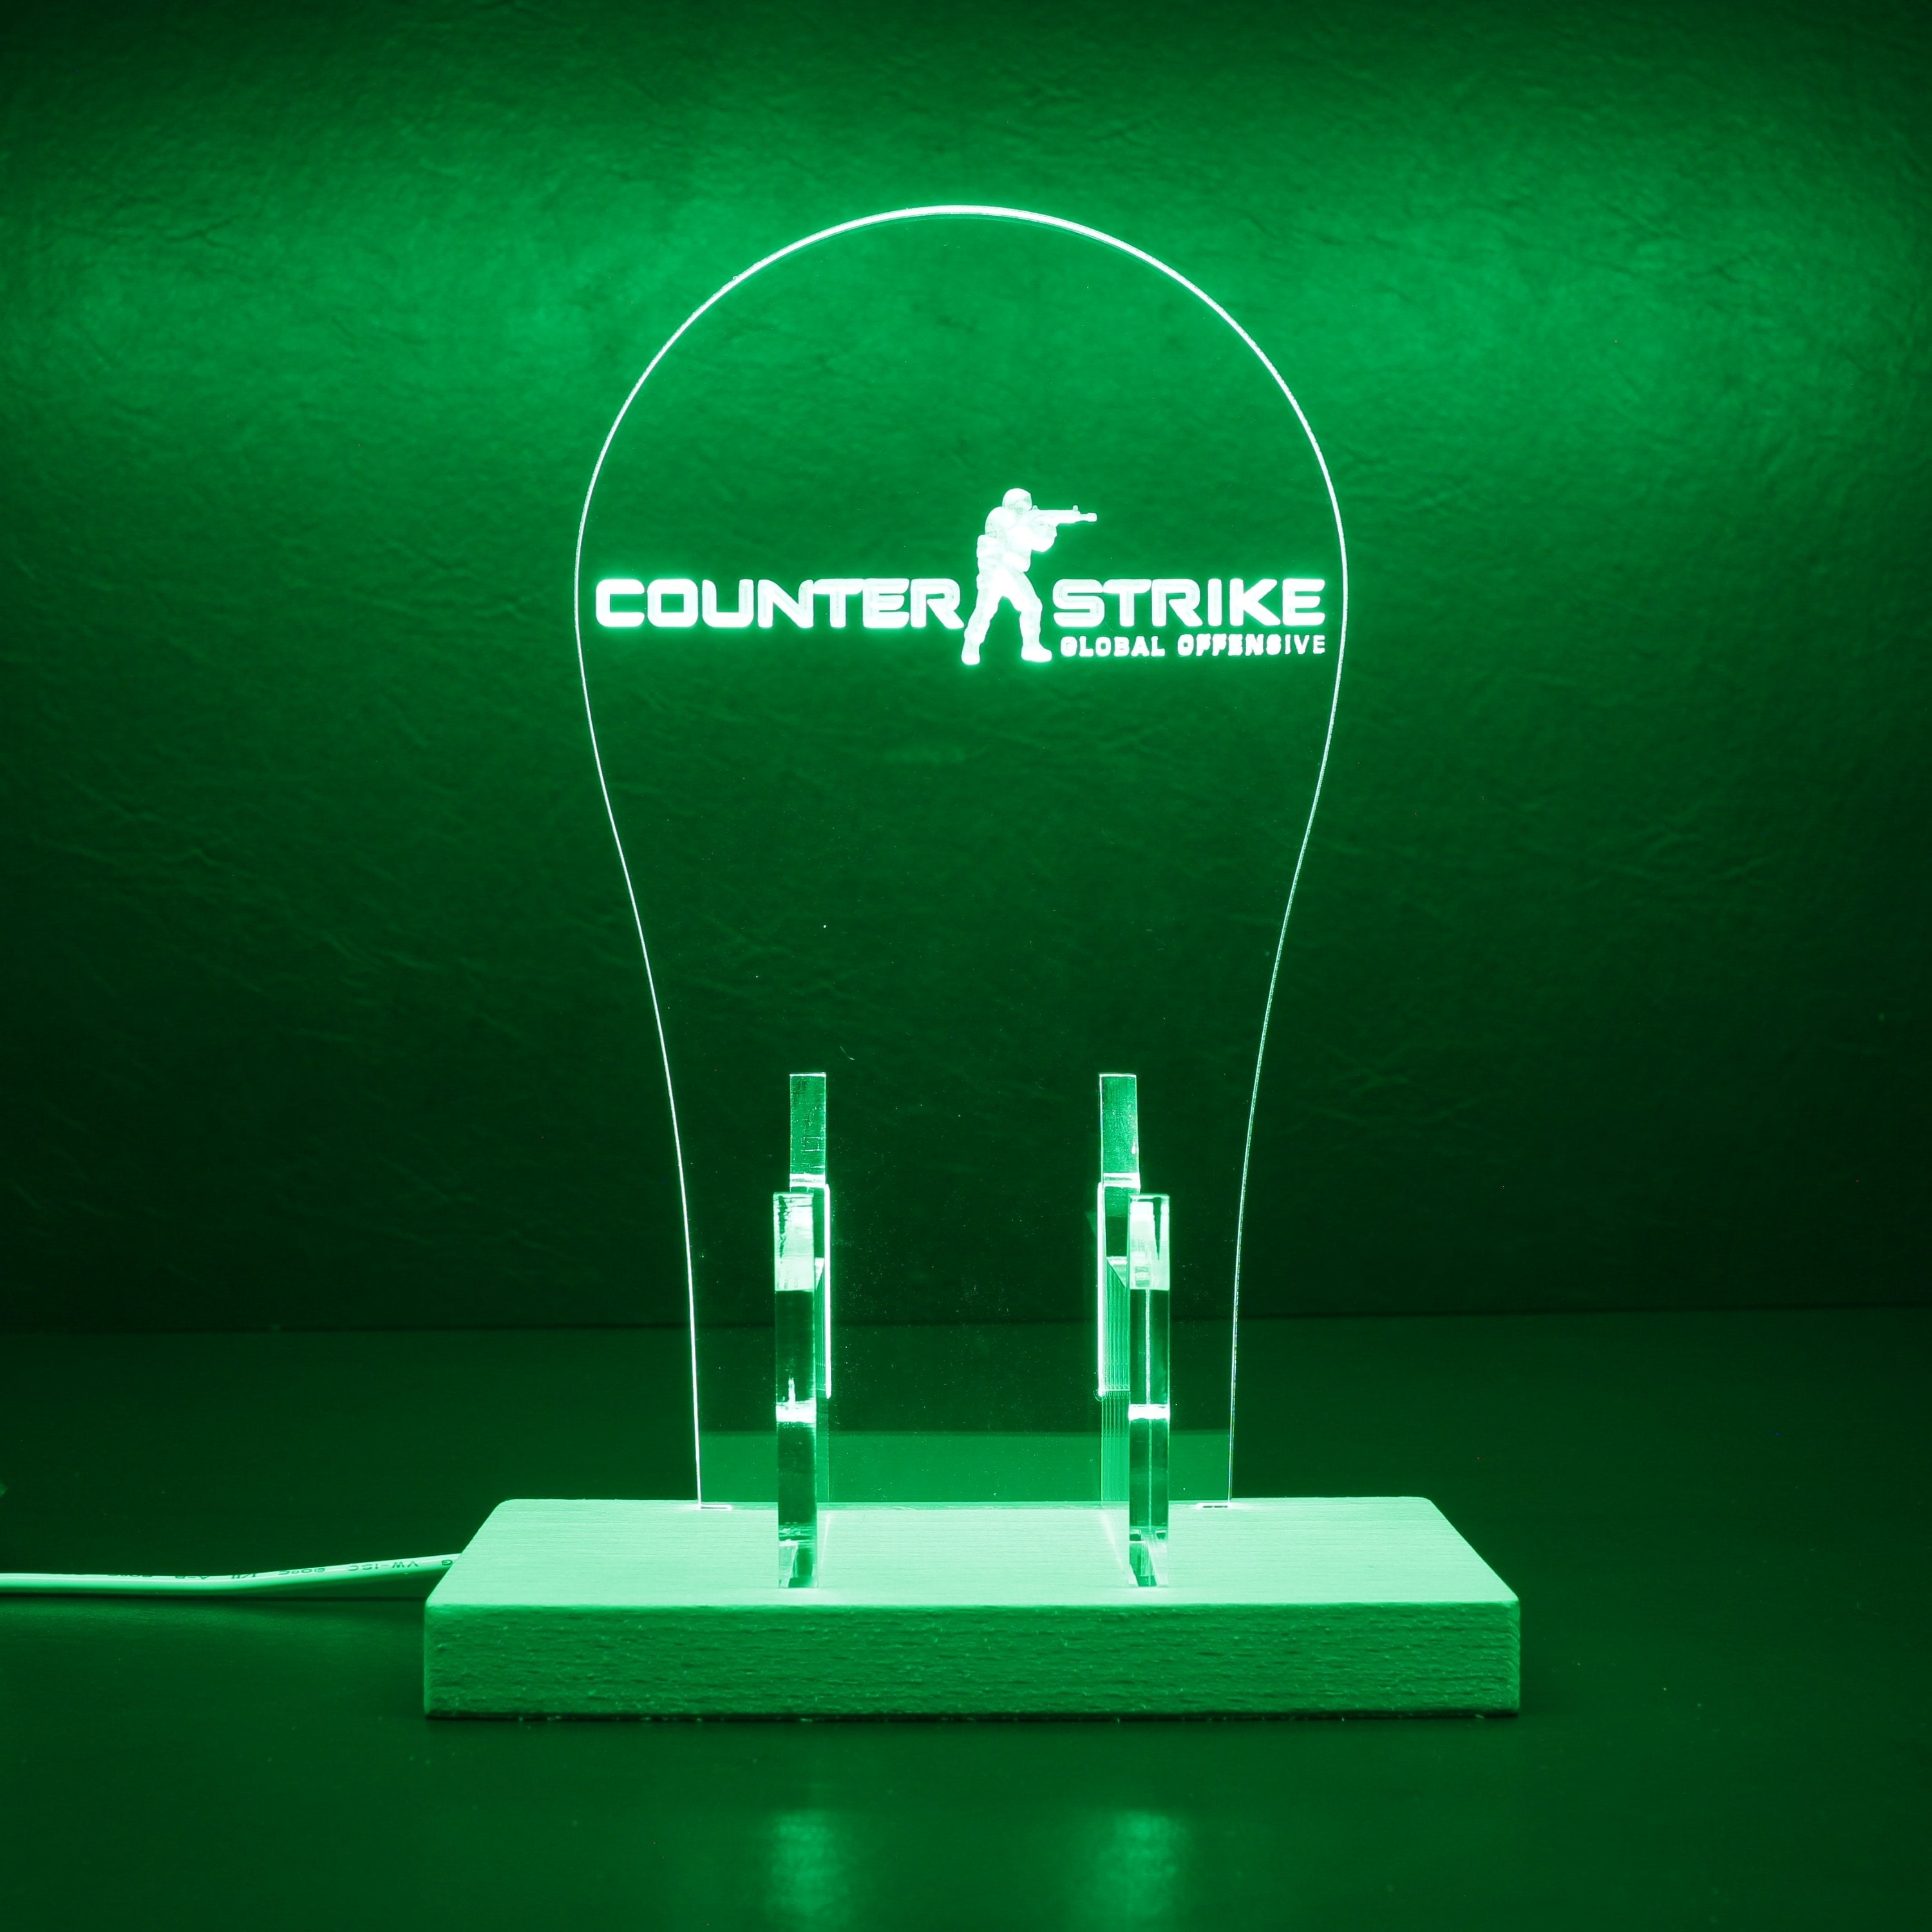 CSGO LED Gaming Headset Controller Stand